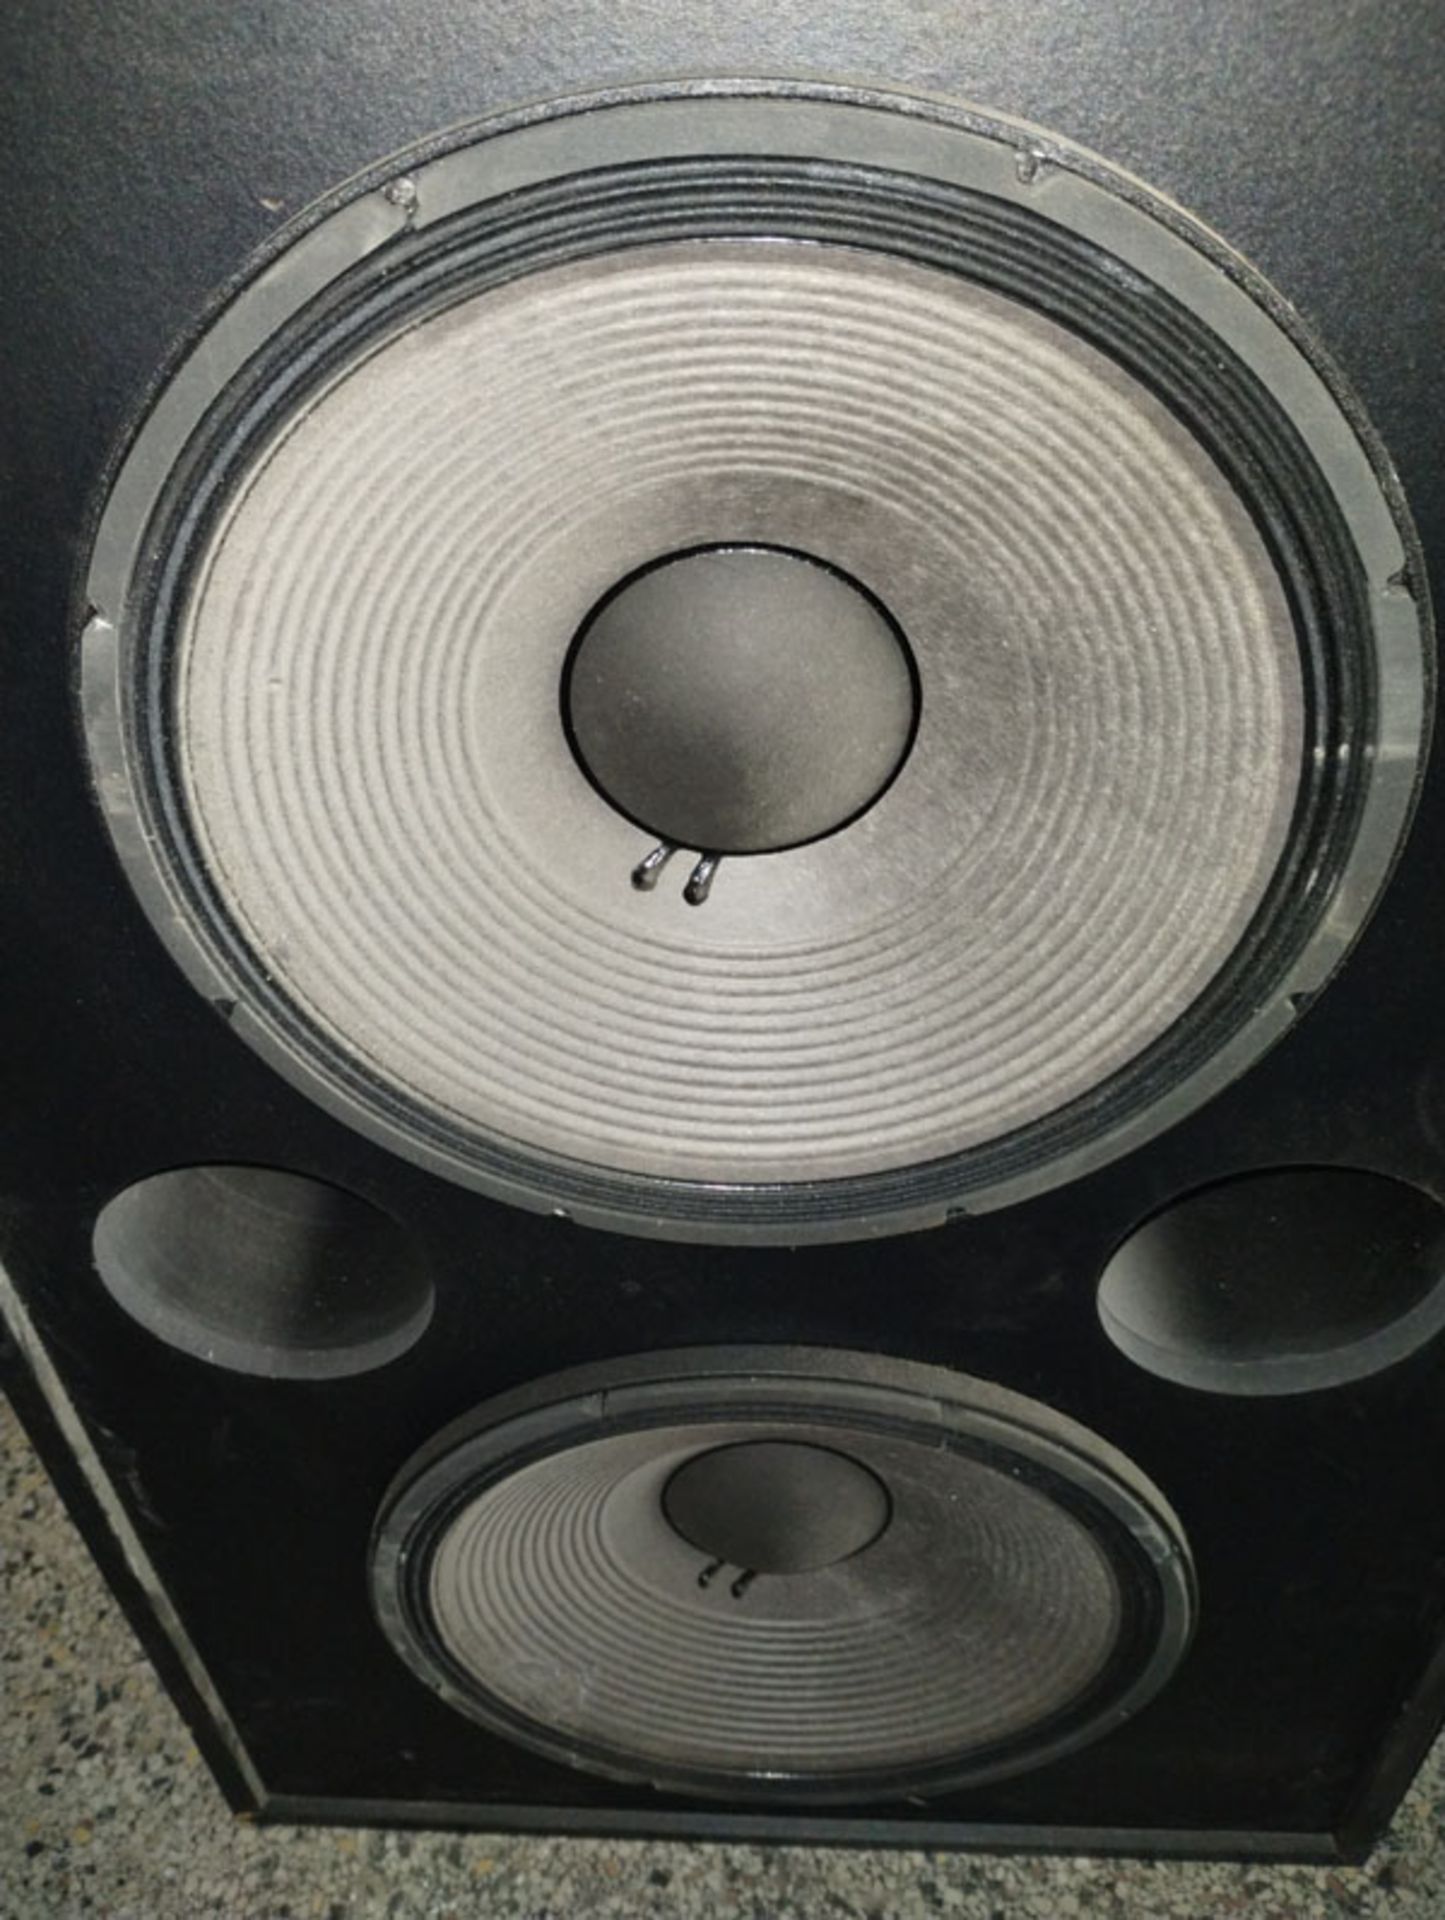 JBL PROFESSIONAL SERIES MODEL: 4648TH 15" SUBWOOFER - 26x18x39" TOTAL DIMENSIONS - Image 3 of 7